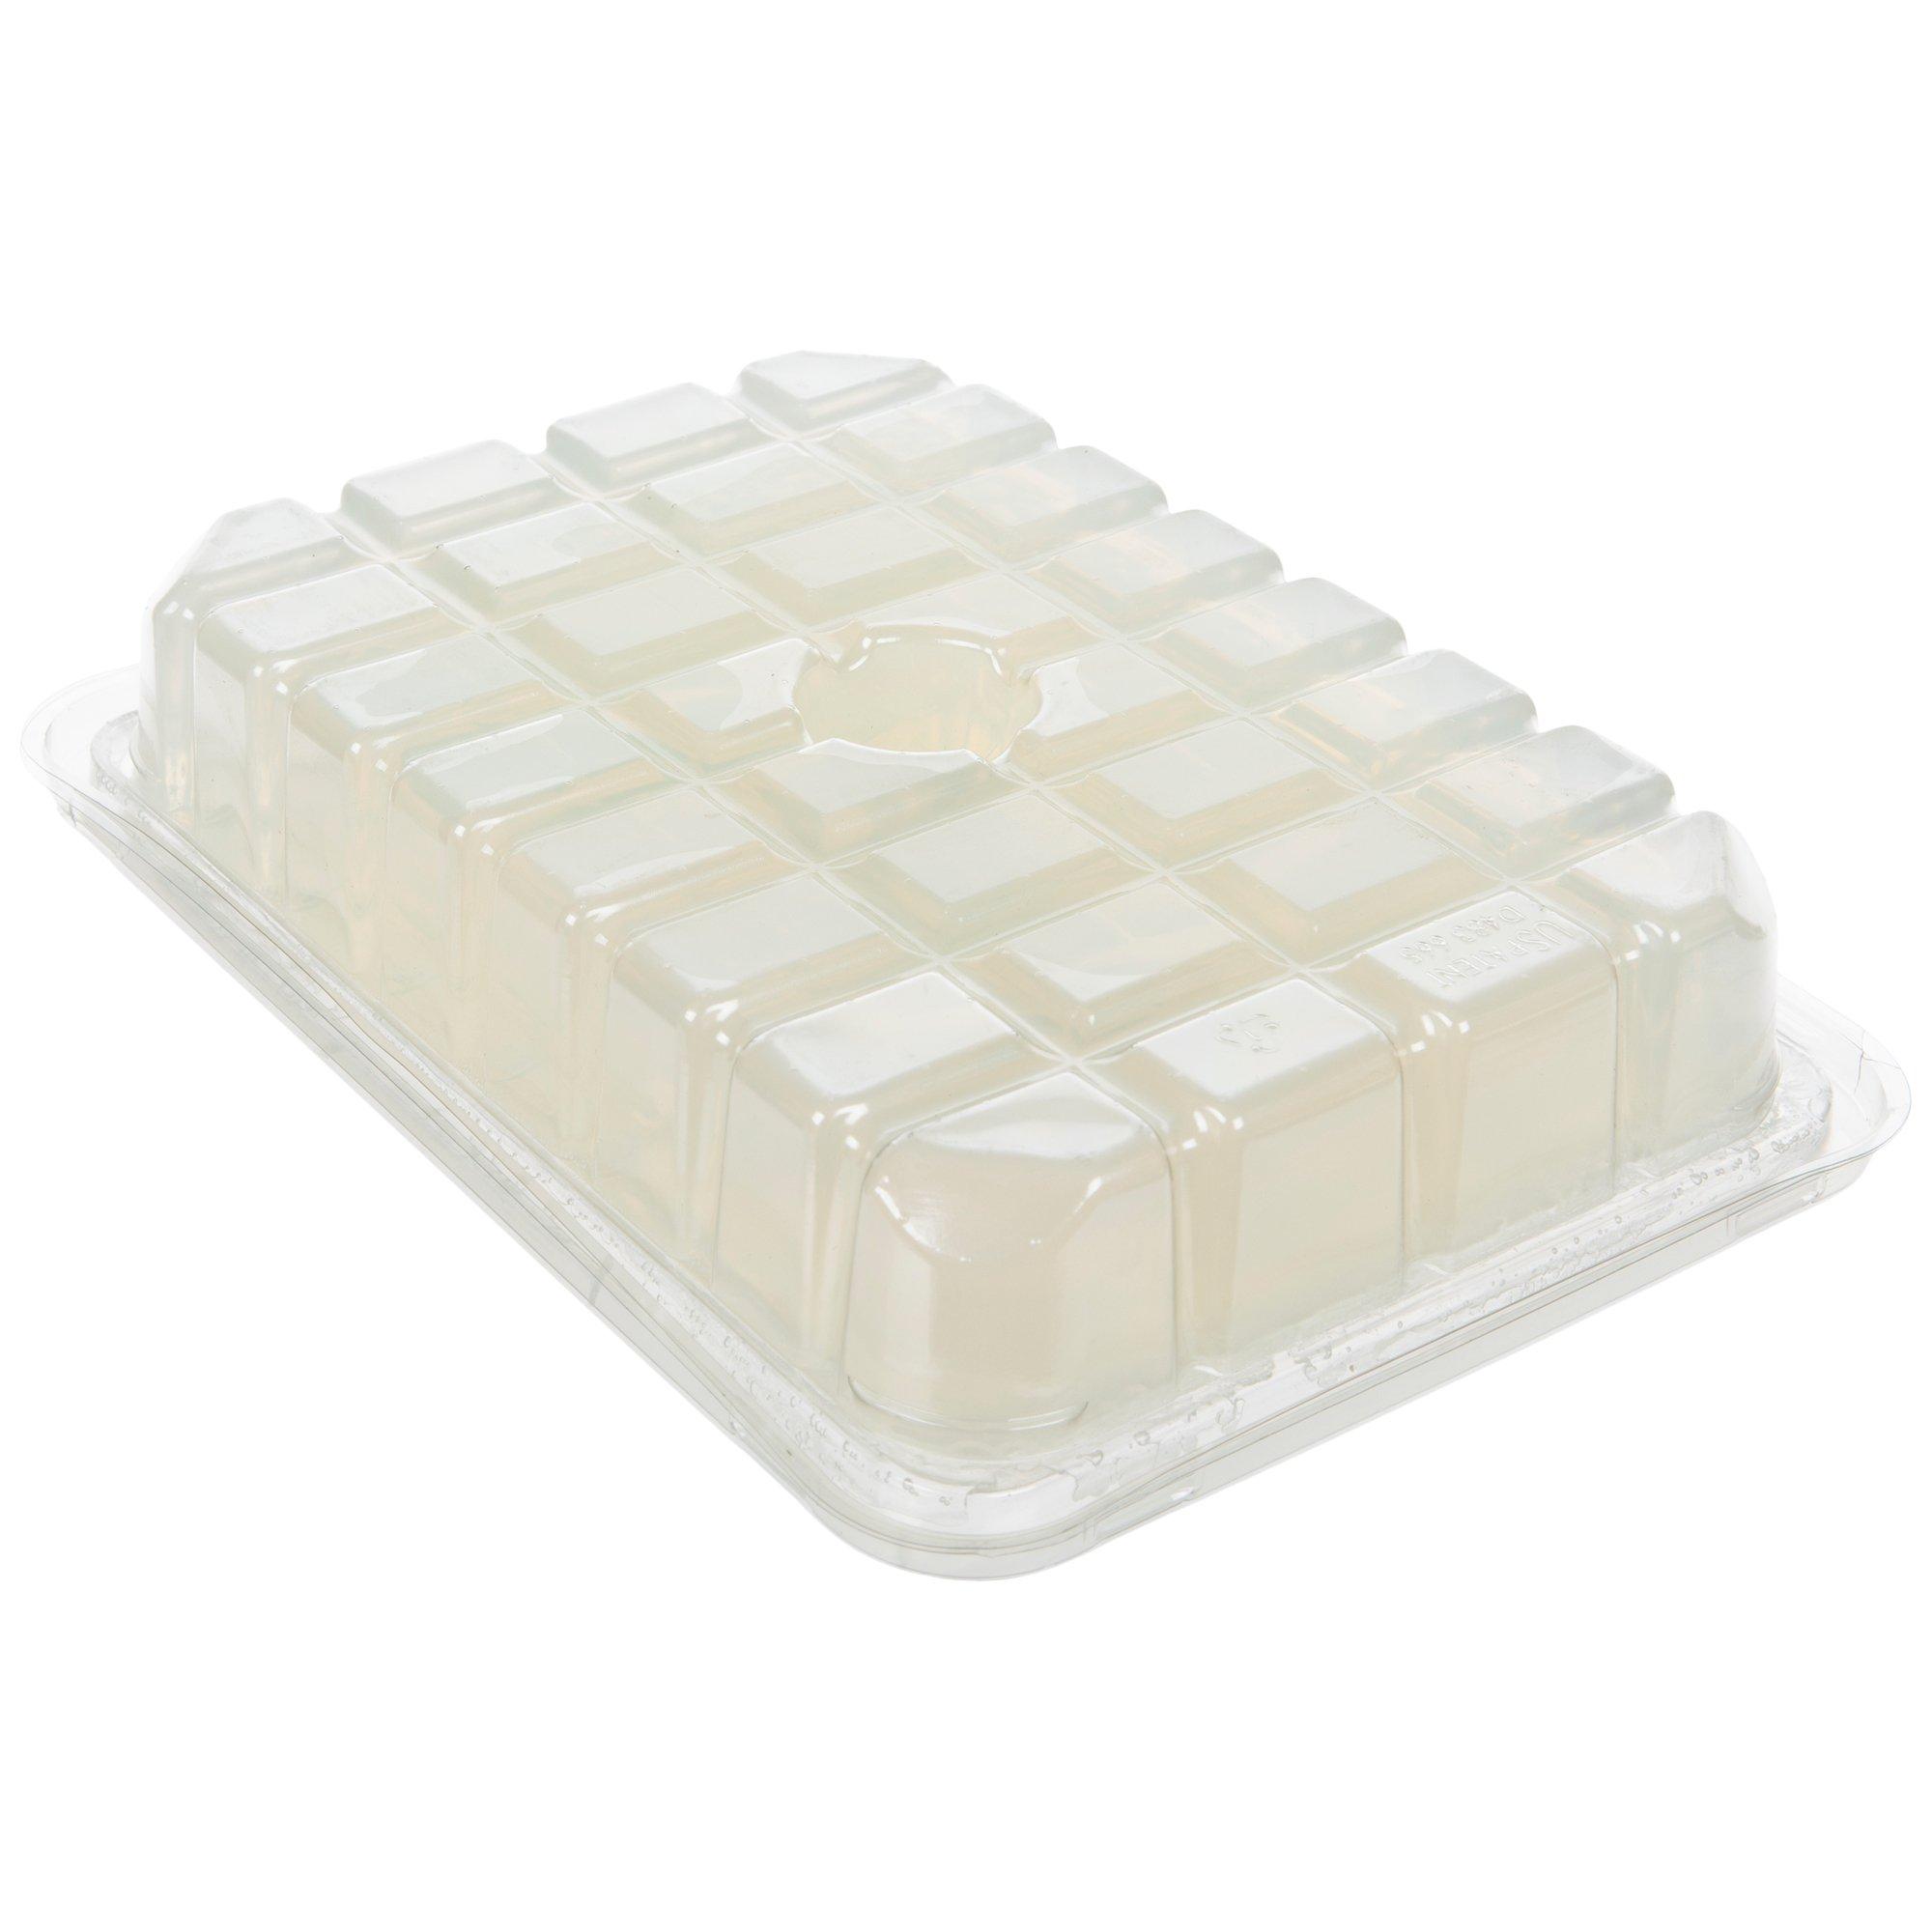 Mann Lake Bee & Ag Supply Suspend Clear Soap Base - 2 lb